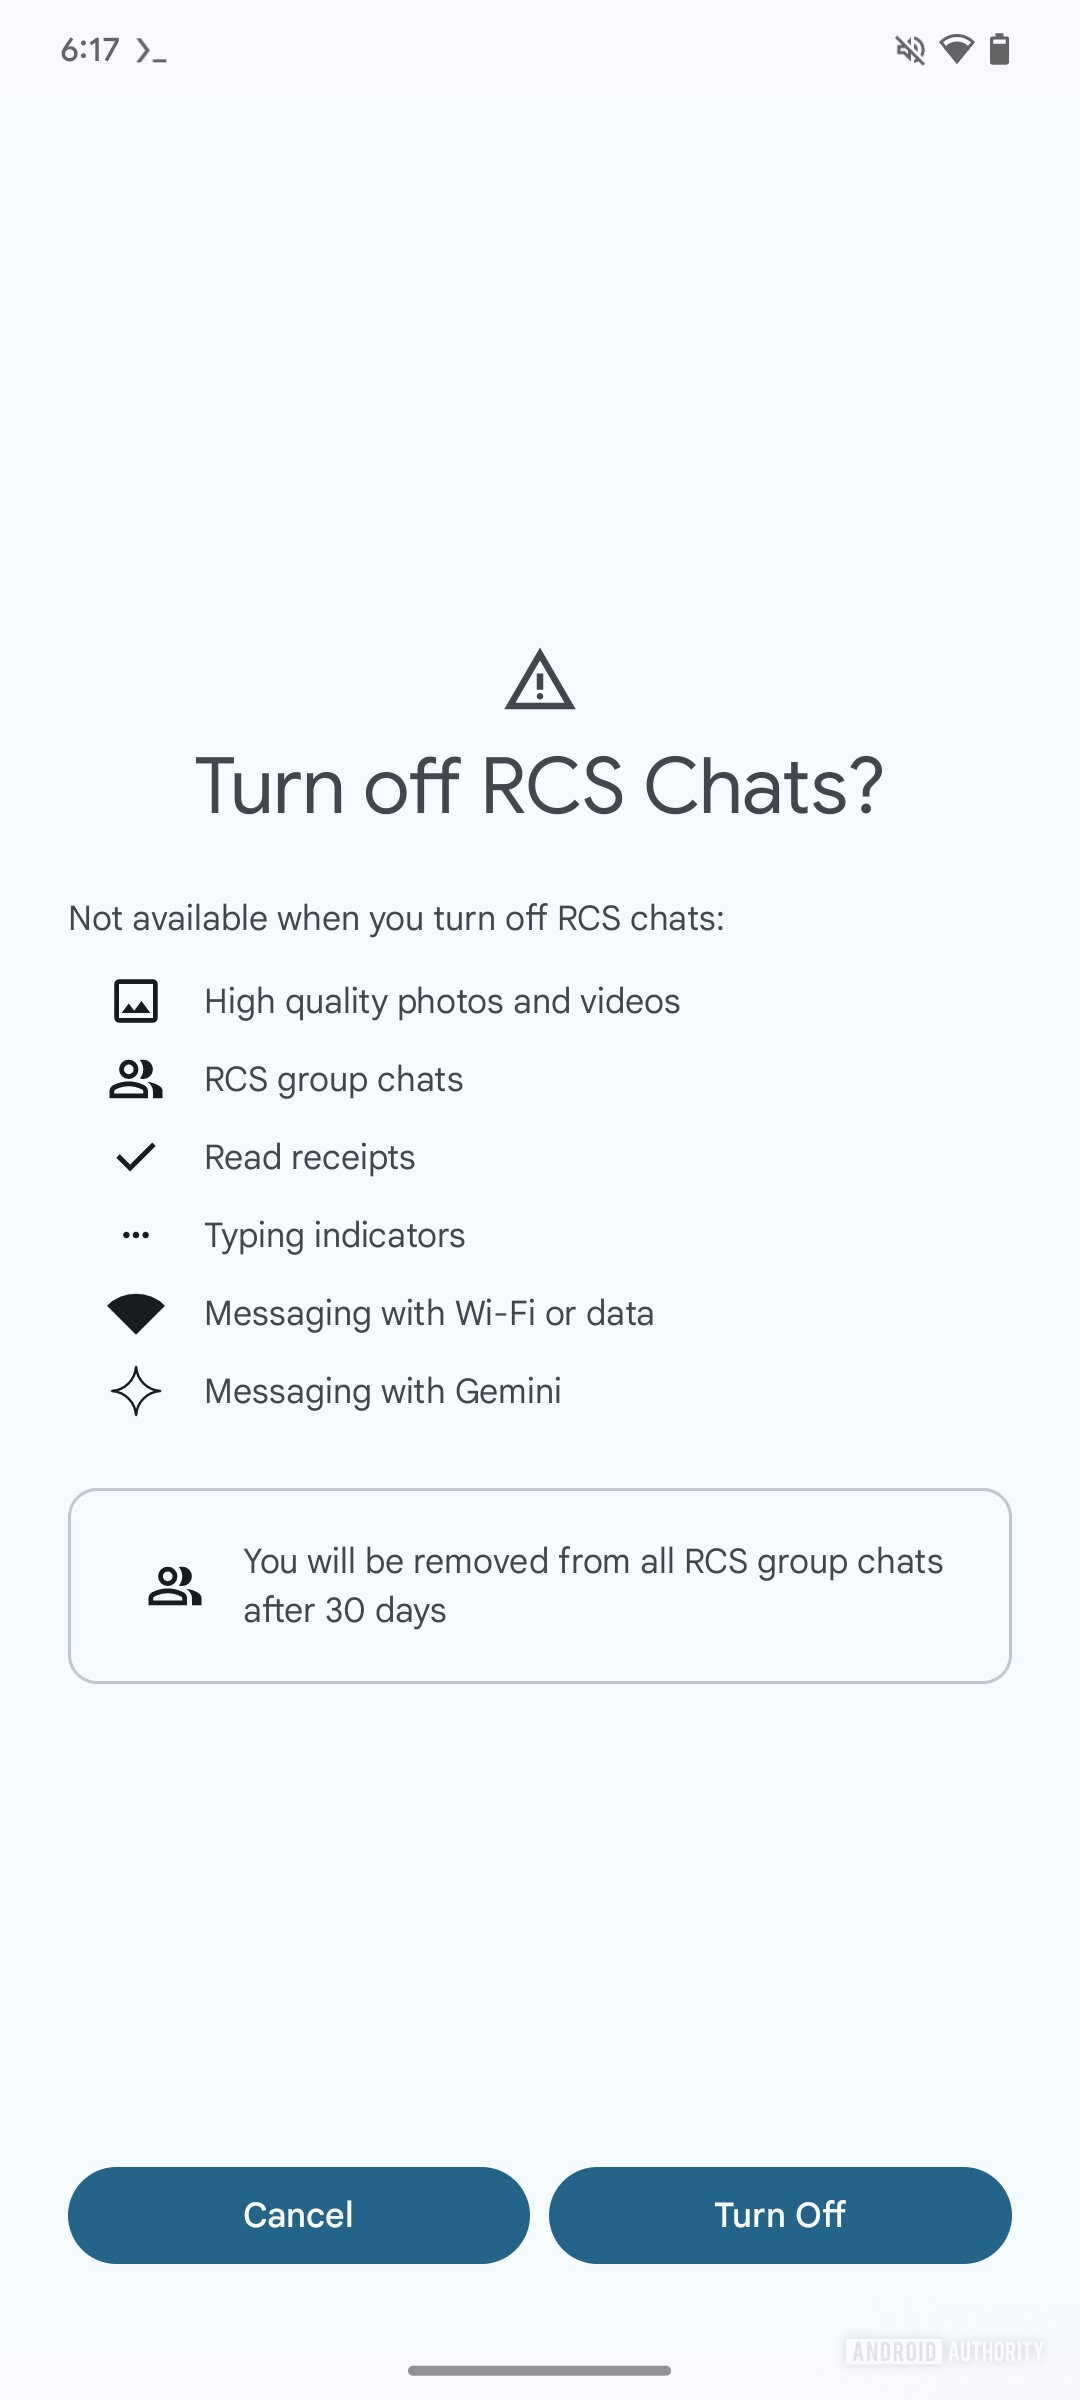 Google Messages Warning screen on turning off RCS